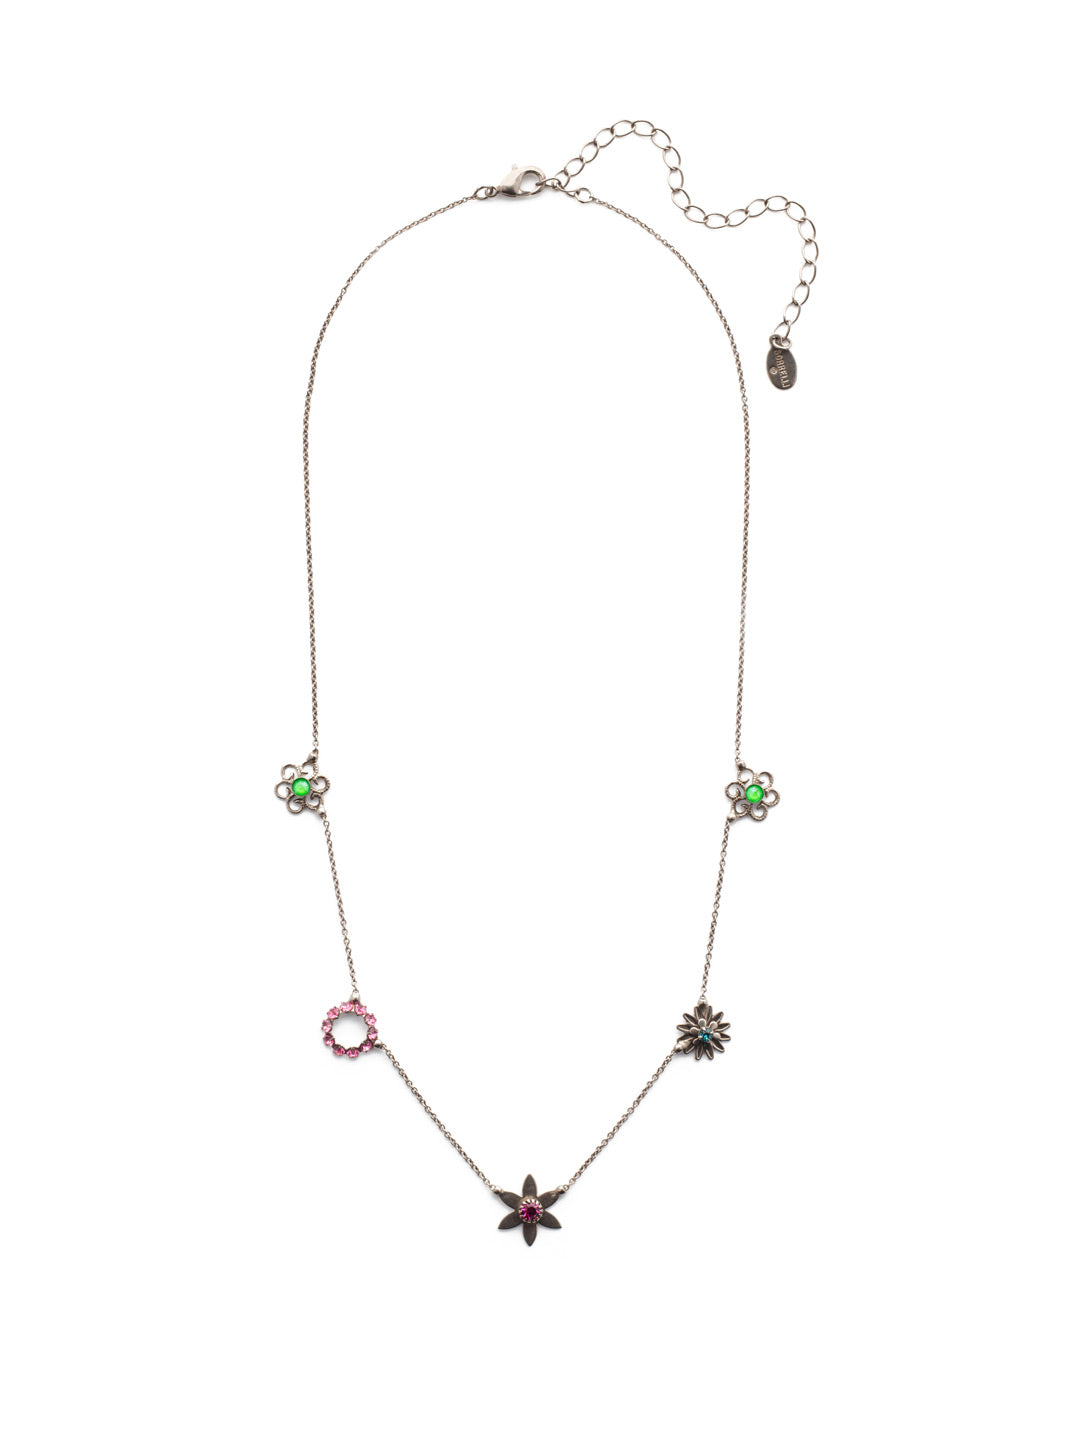 Normani Tennis Necklace - NEV1ASWDW - <p>The Normani Tennis Necklace features a delicate chain dotted with floral charm pieces and sparkling Sorrelli crystals, too. From Sorrelli's Wild Watermelon collection in our Antique Silver-tone finish.</p>